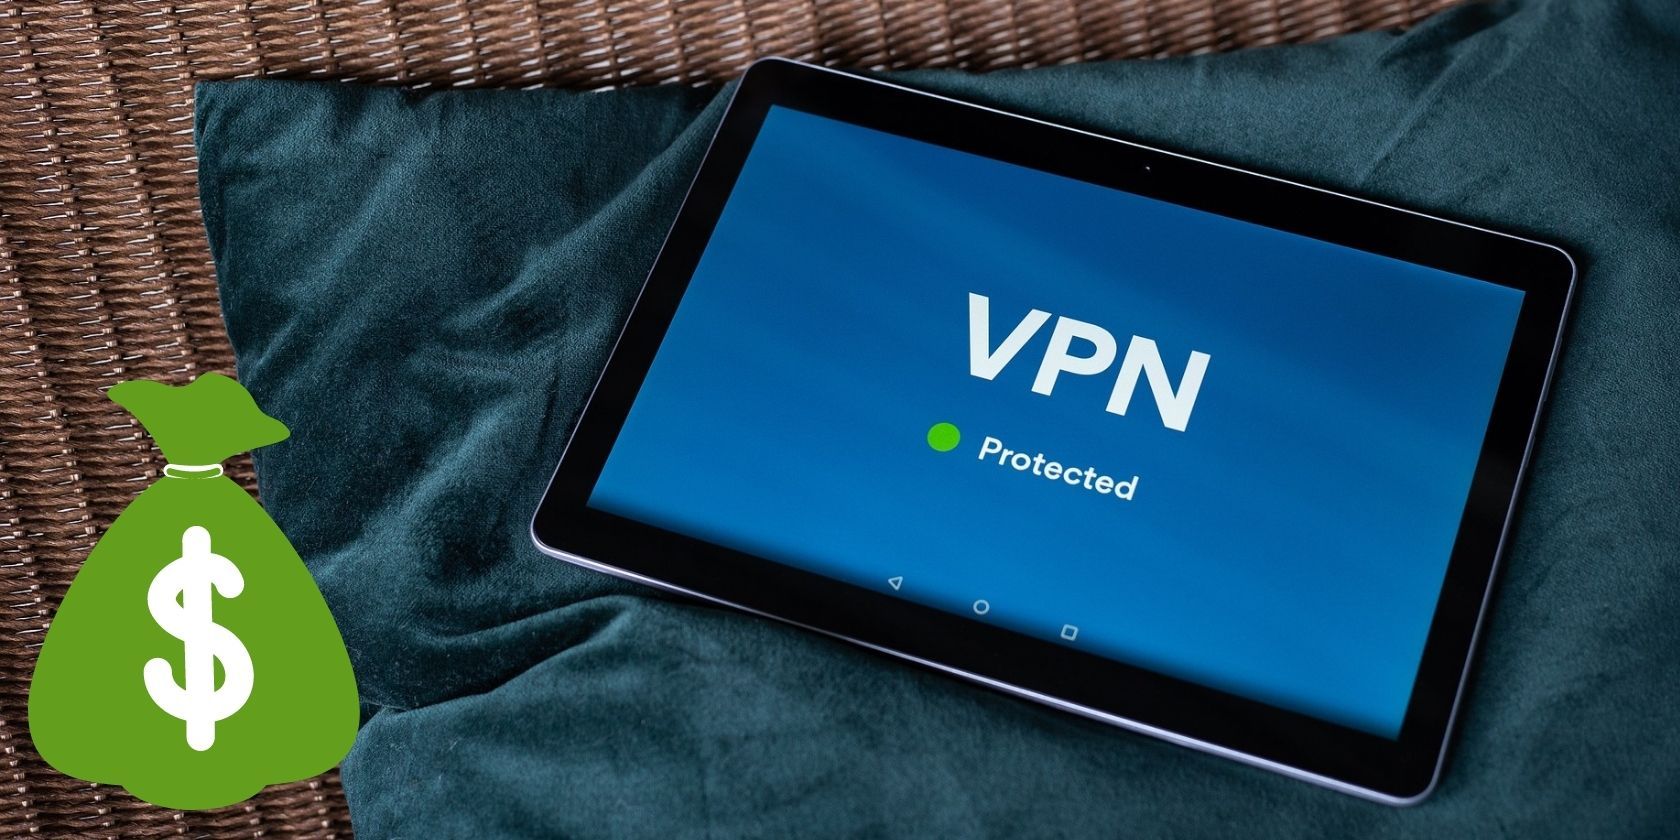 vpn on tablet with money bag icon